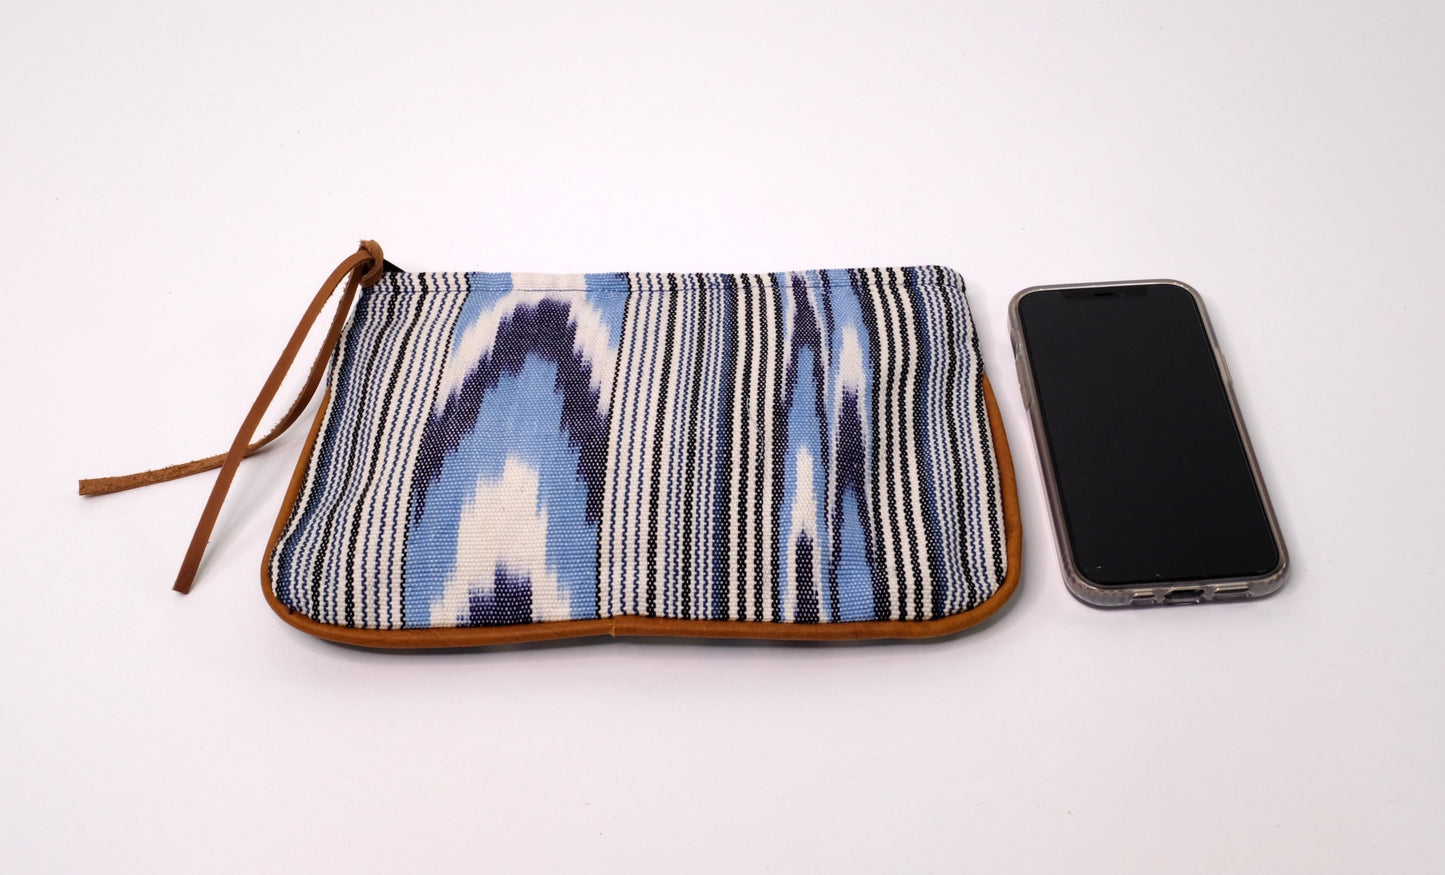 Handwoven Cosmetic Purse crafted from cotton and leather with light blue pattern.